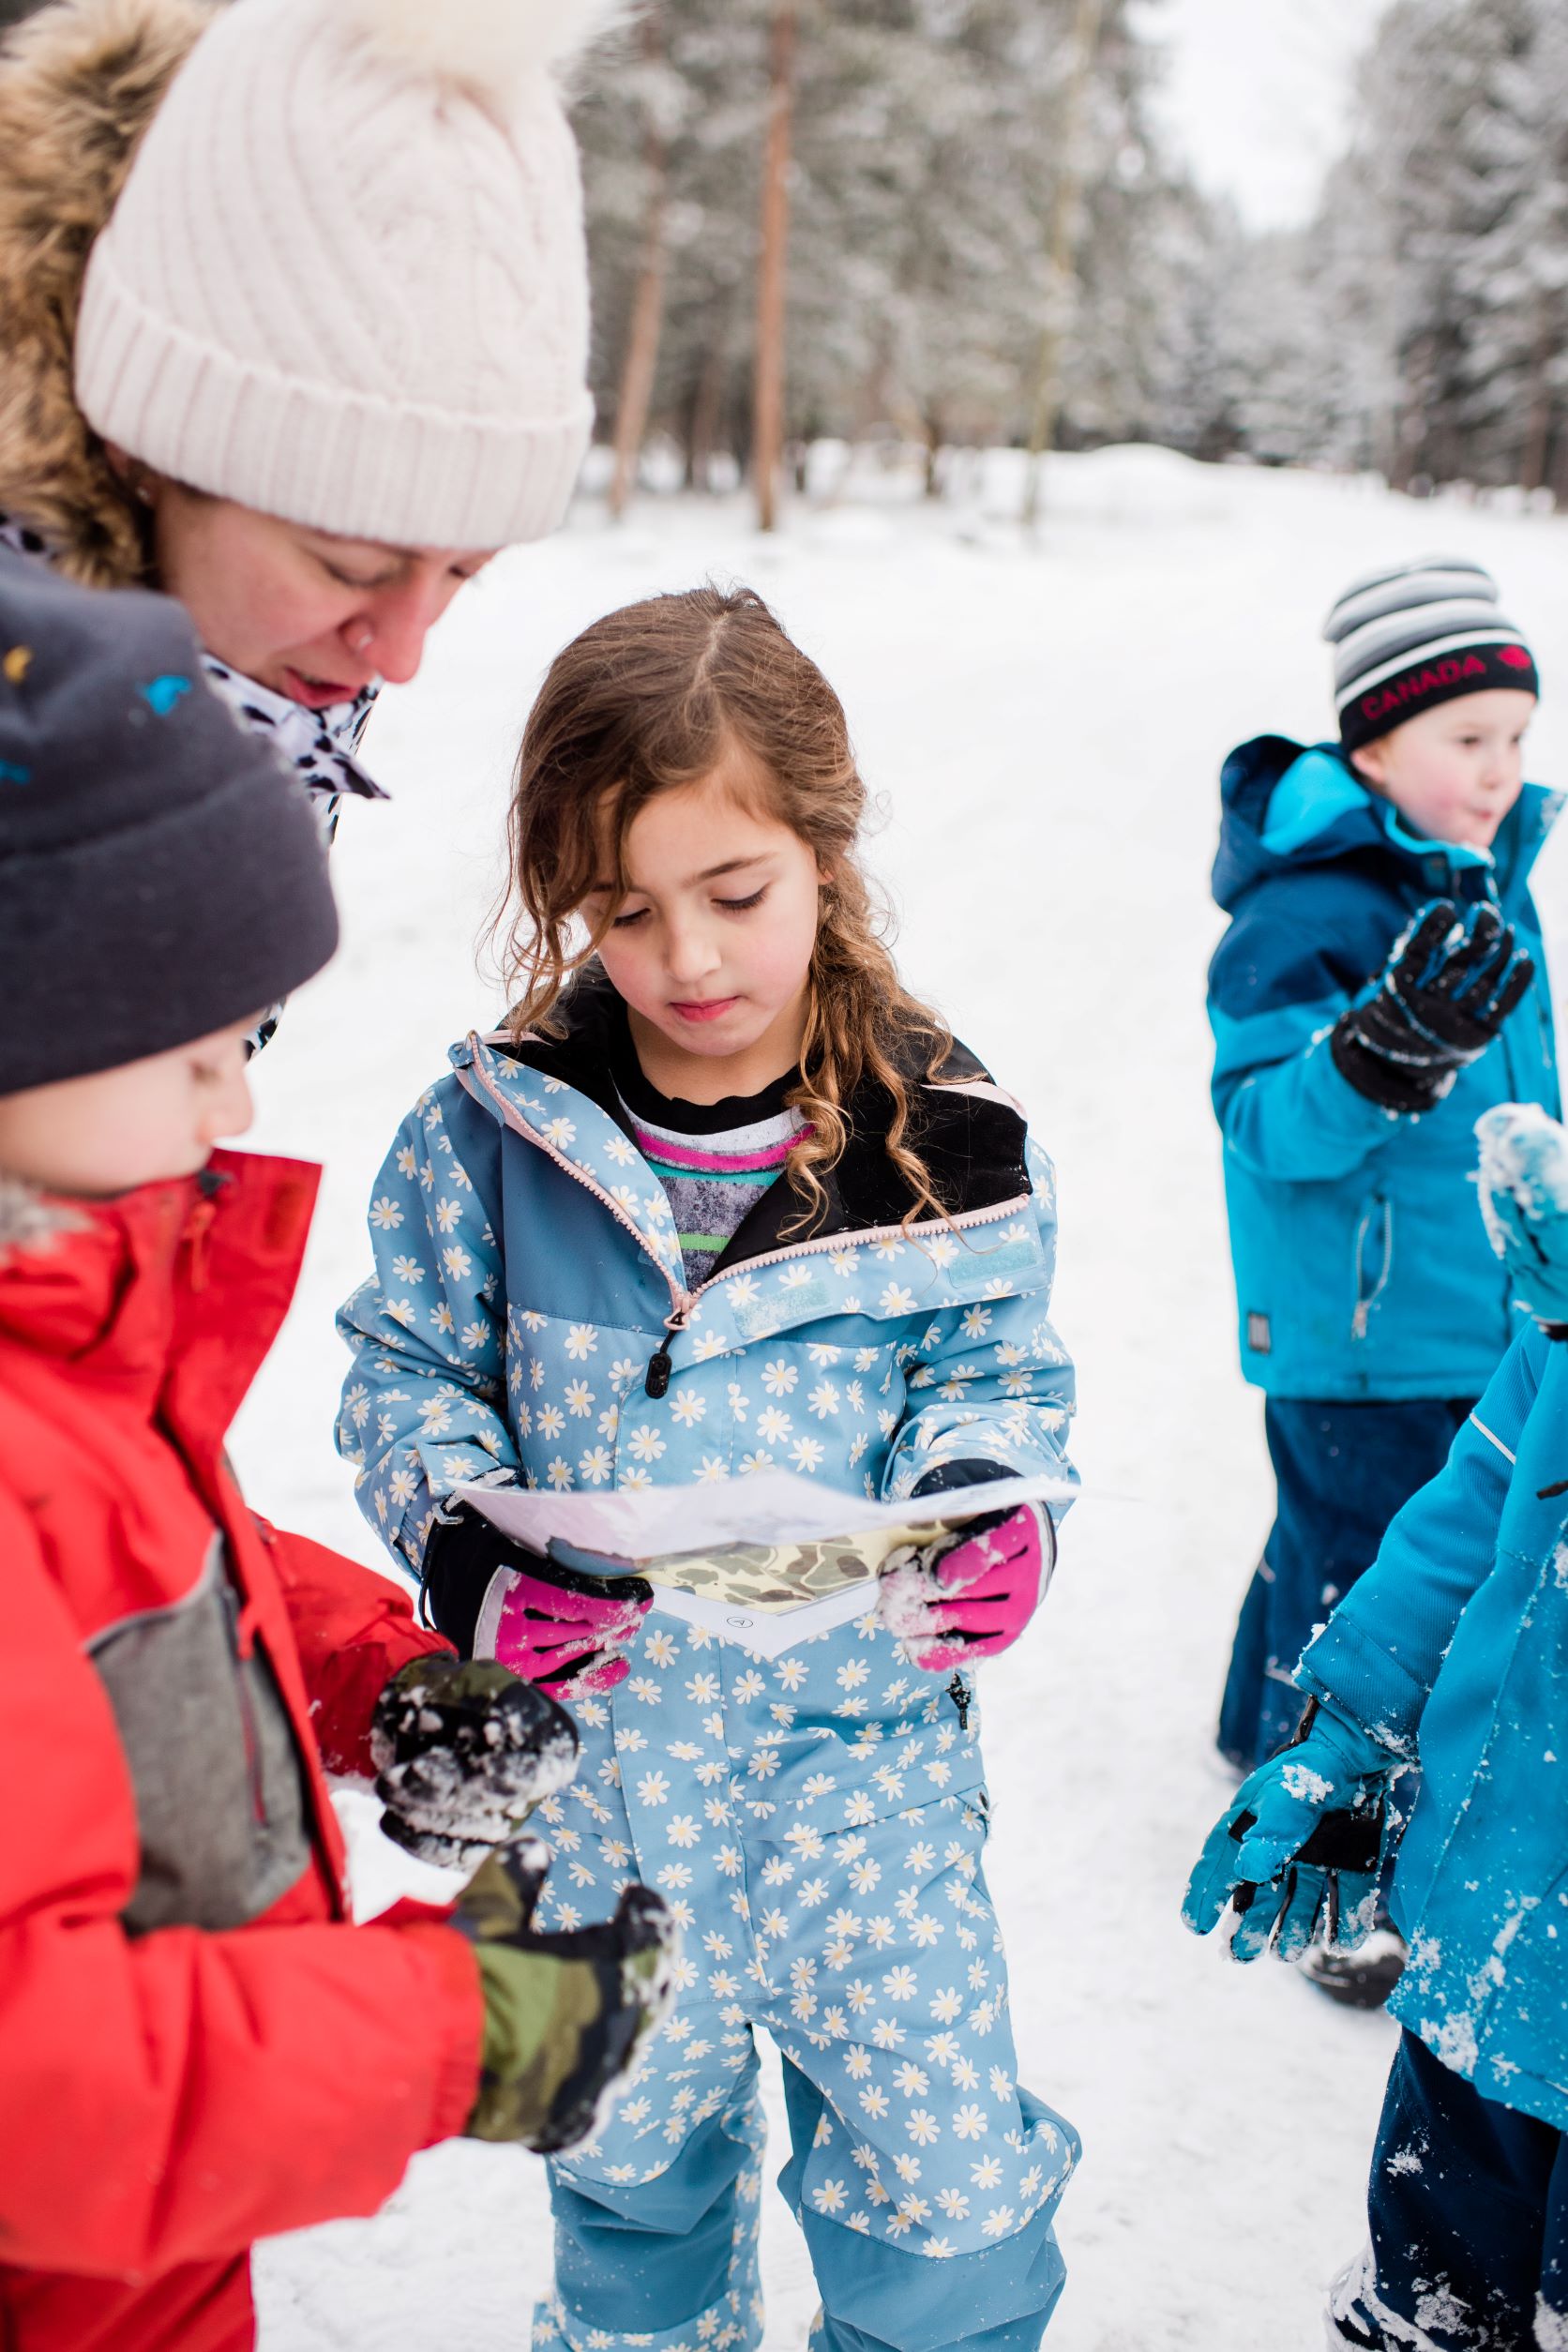 kids looking at a wilderness tracks worksheet to identify animal tracks in the snow, with snowy forest in the background